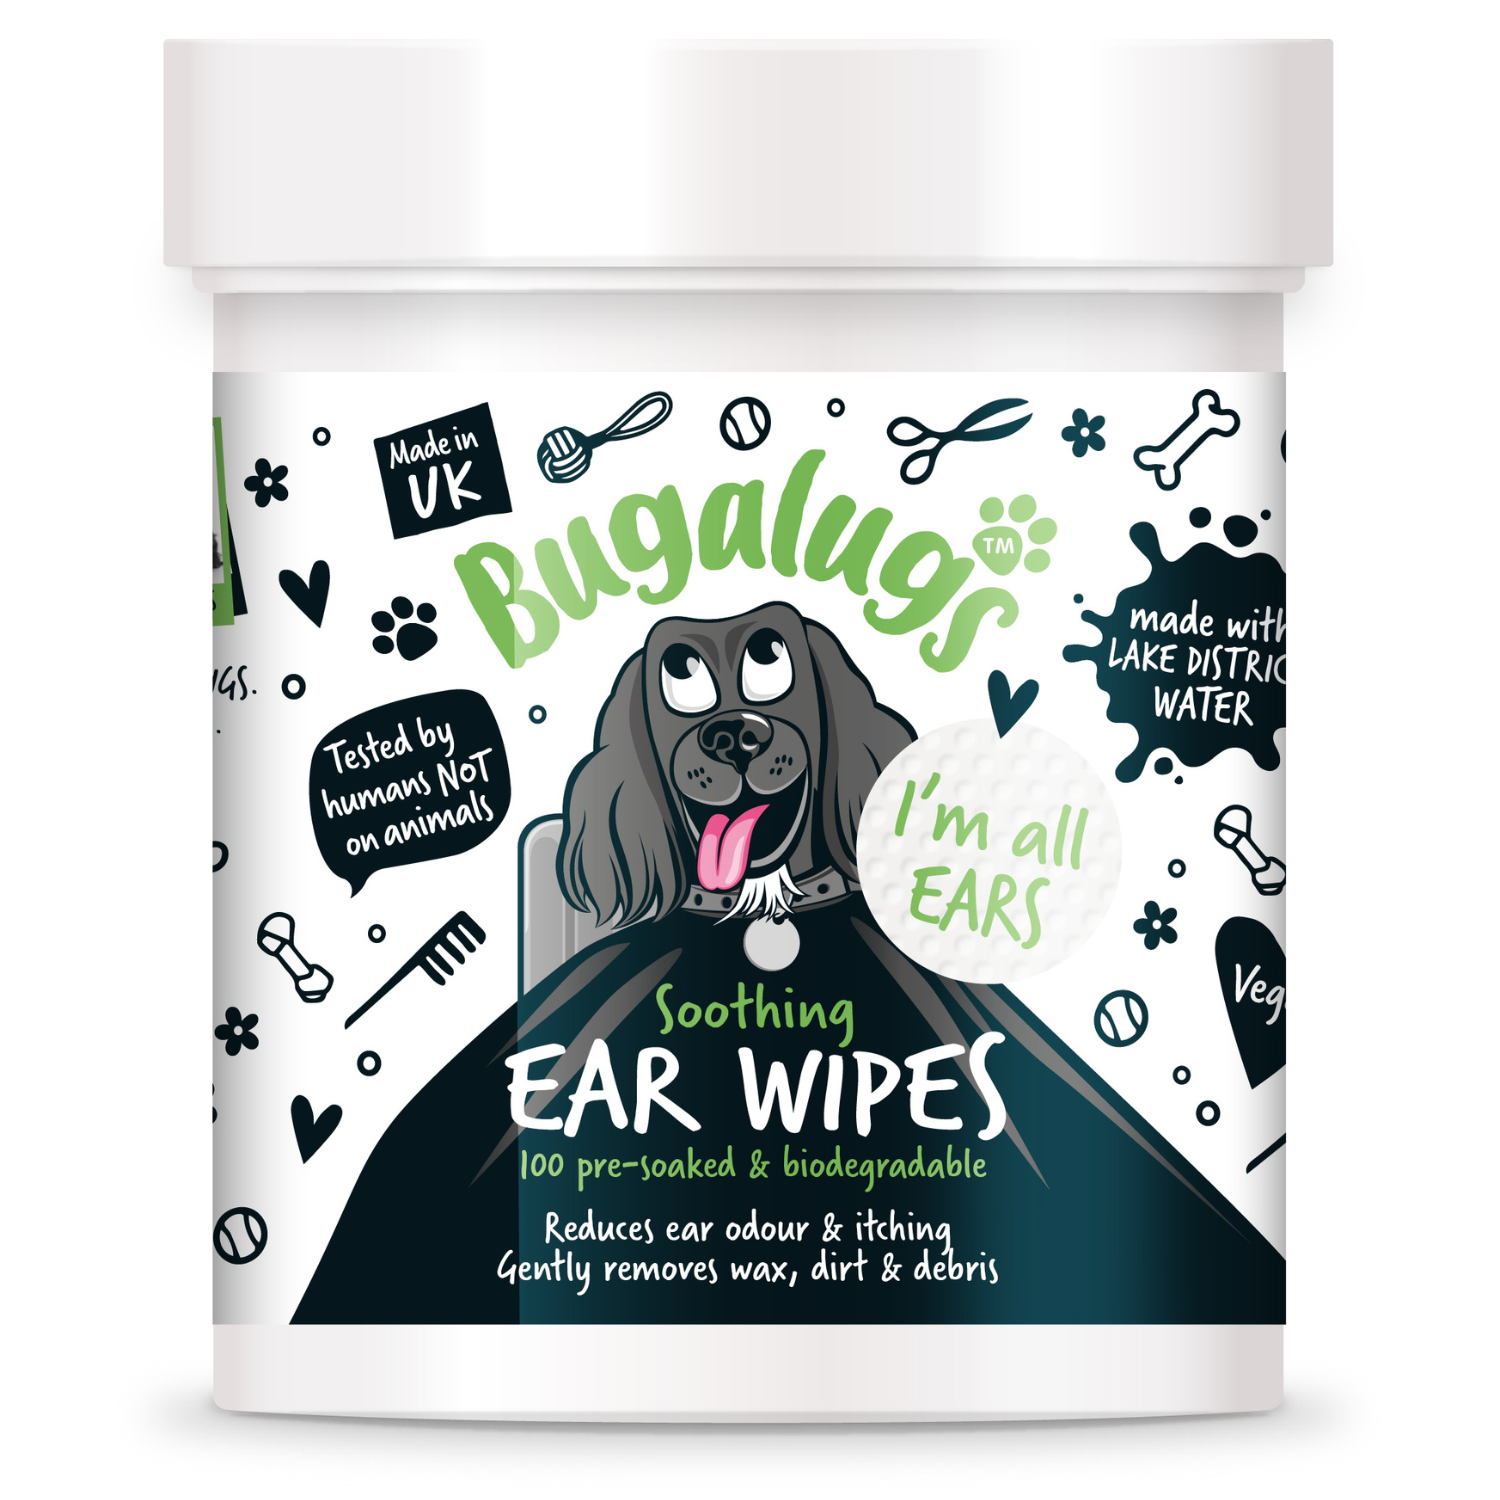 Bugalugs Soothing Ear Wipes - 100 pre-soaked and biodegradable wipes for dogs